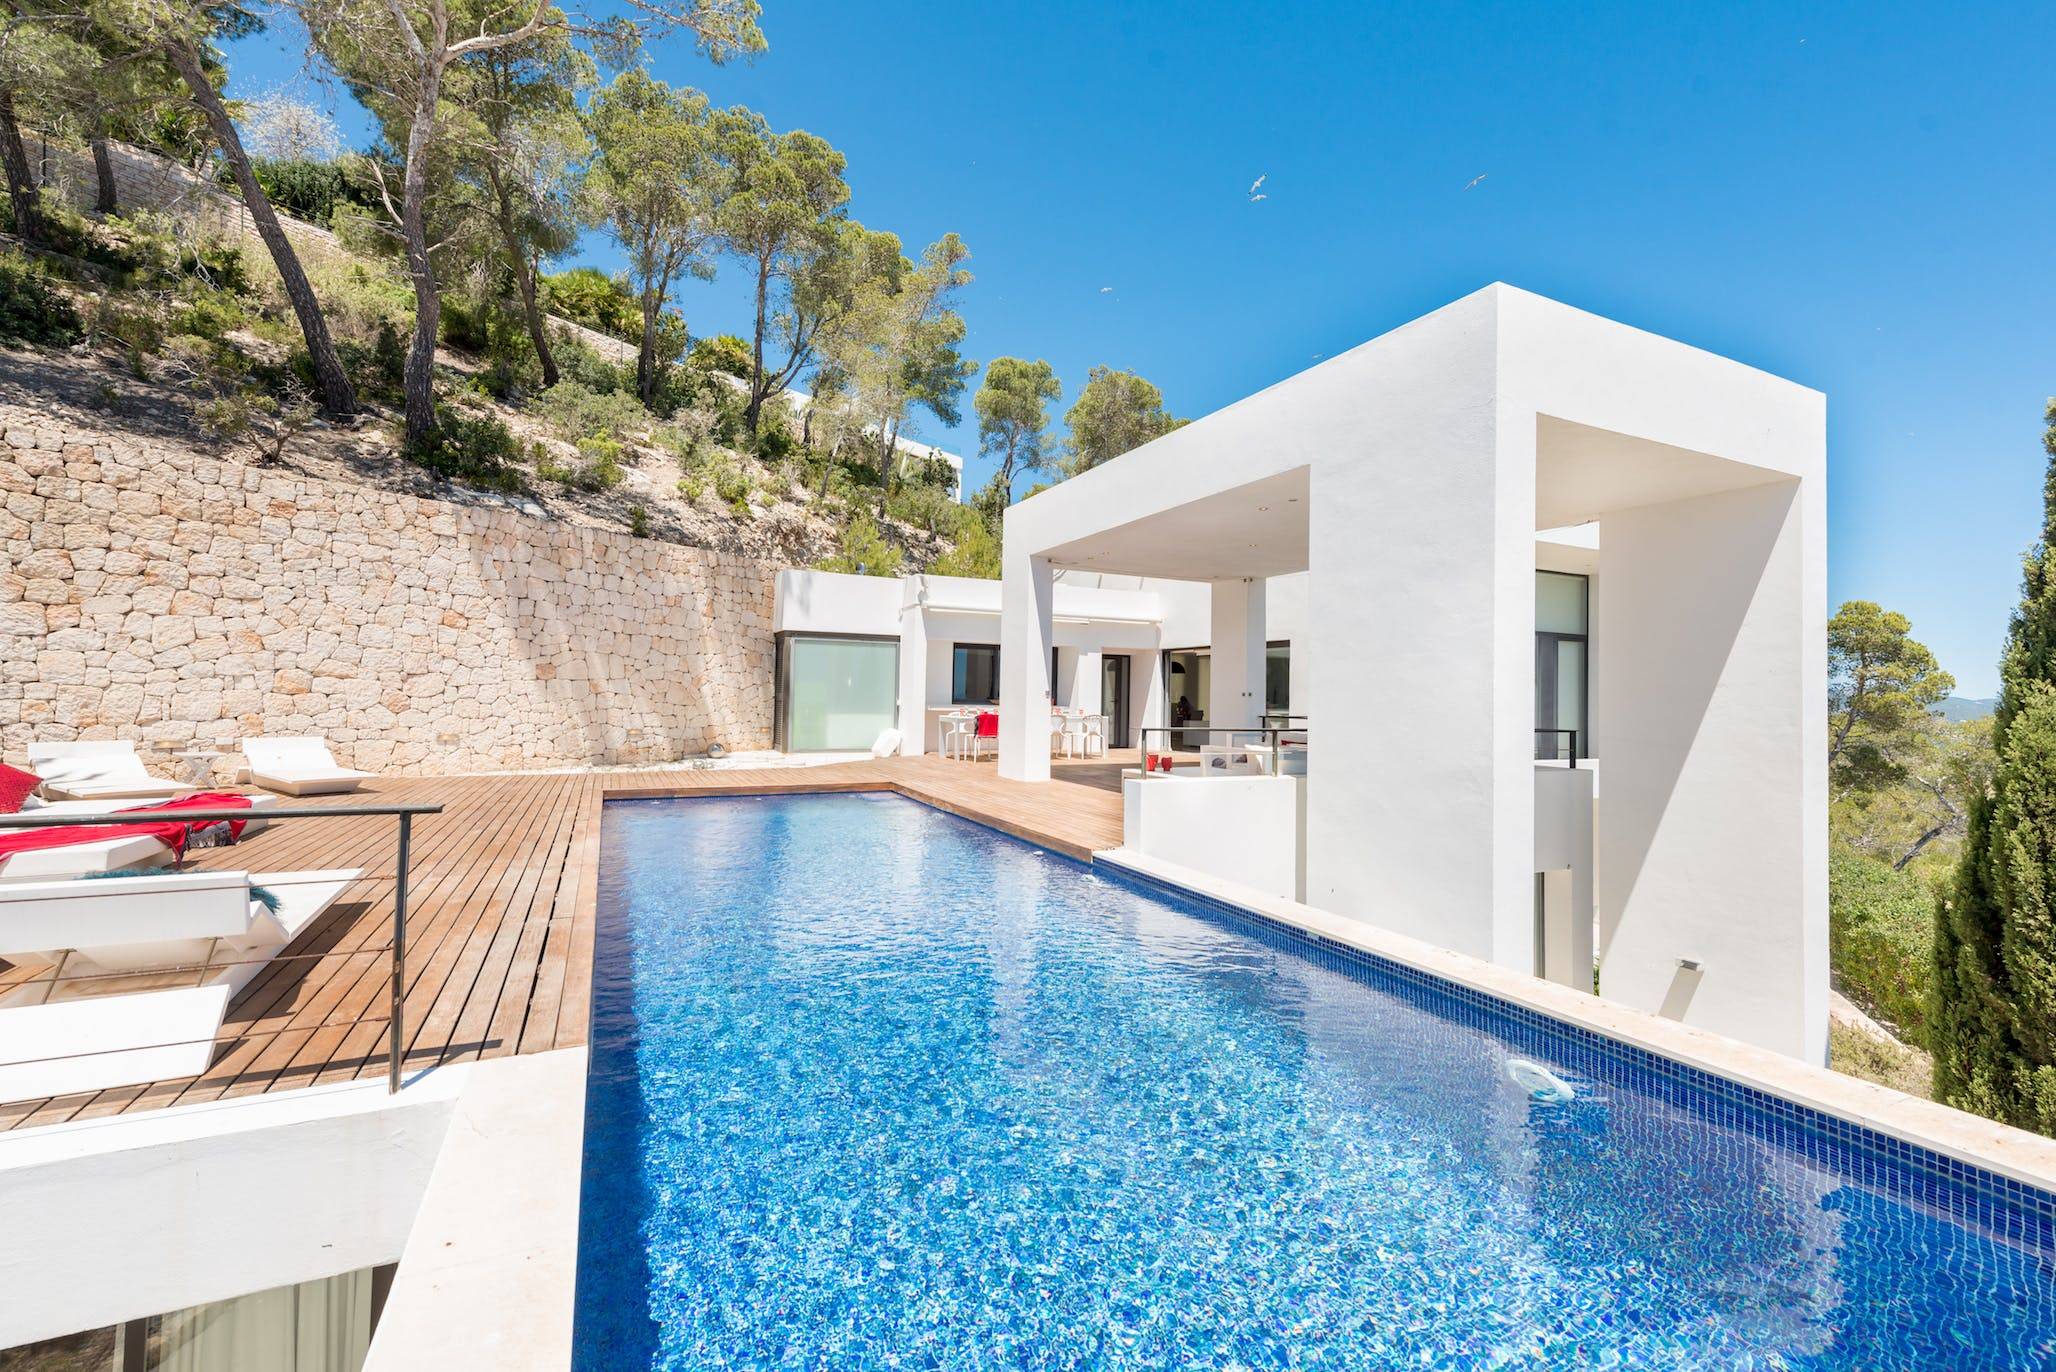 You are currently viewing Vista Infinita “Impeccable modern property on the gated Roca Llisa community on Ibiza’s east coast.”